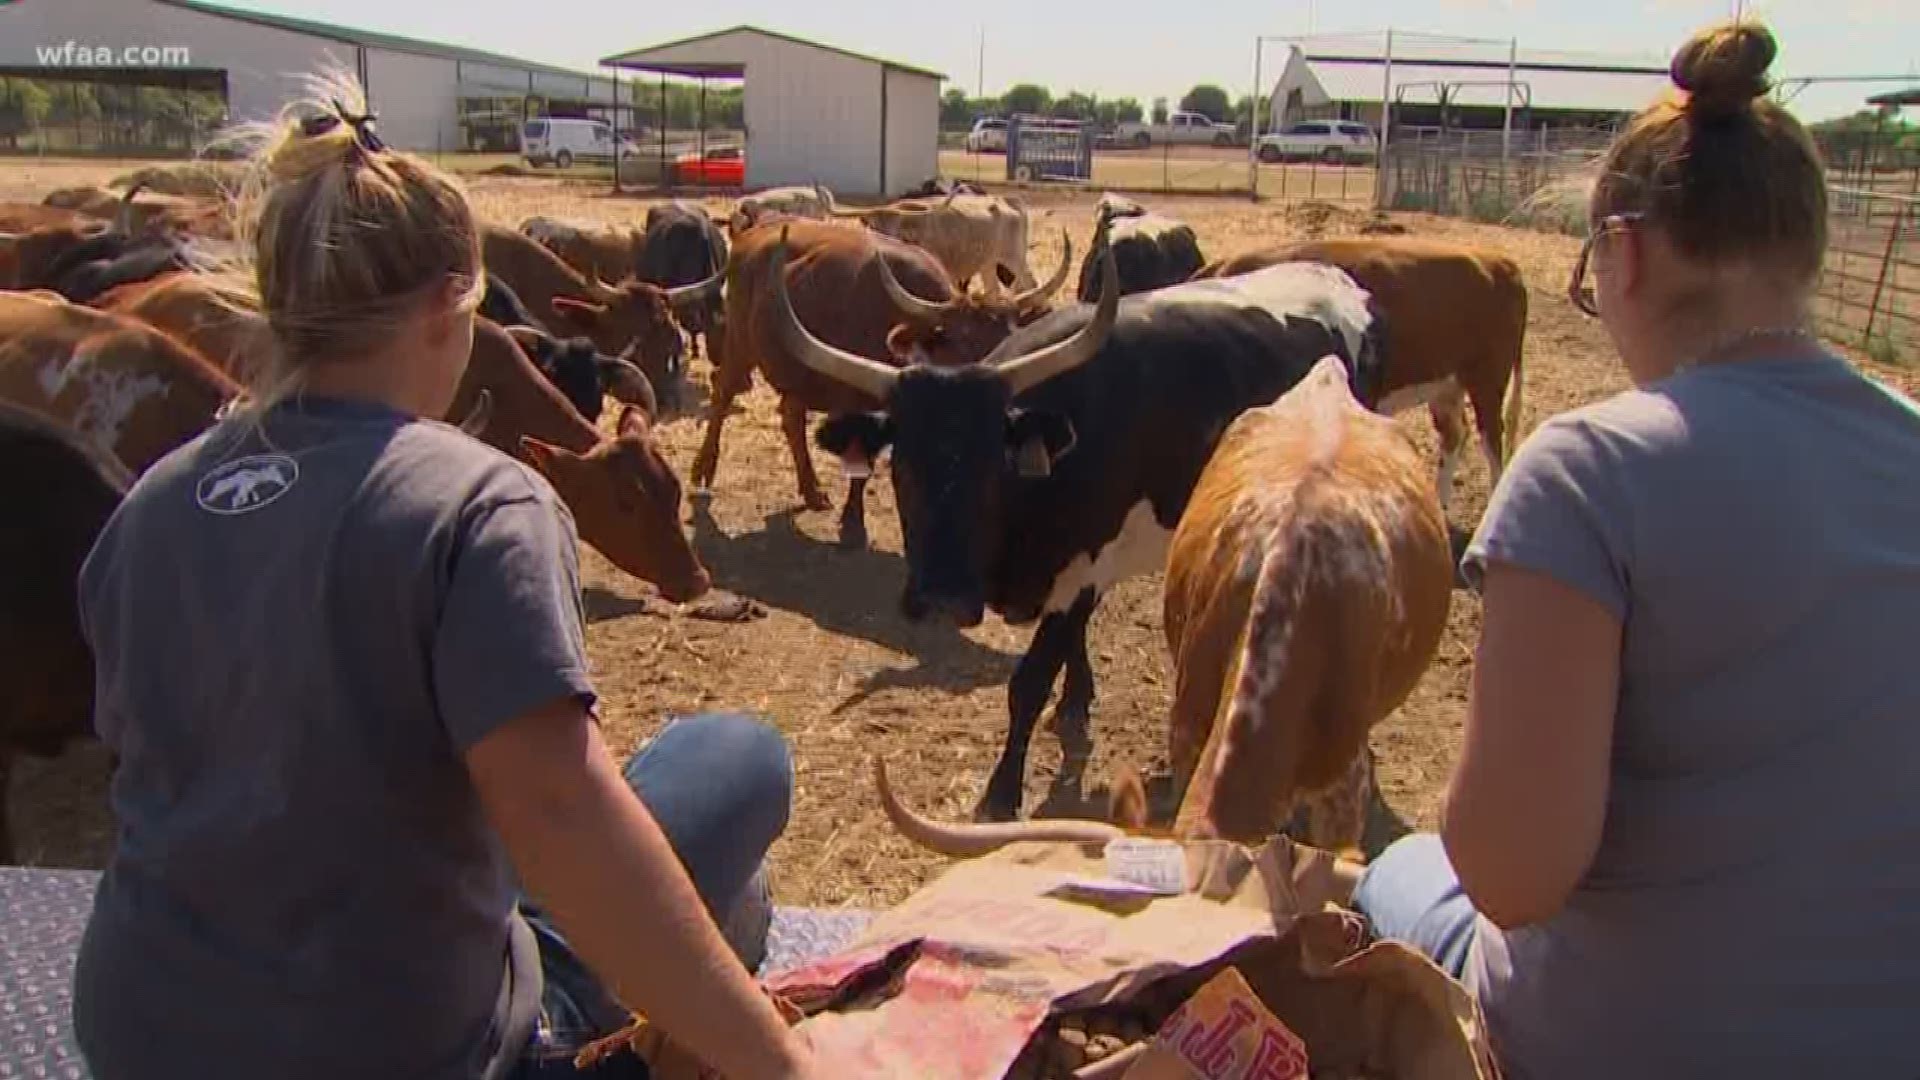 Longhorns get second chance after rescue